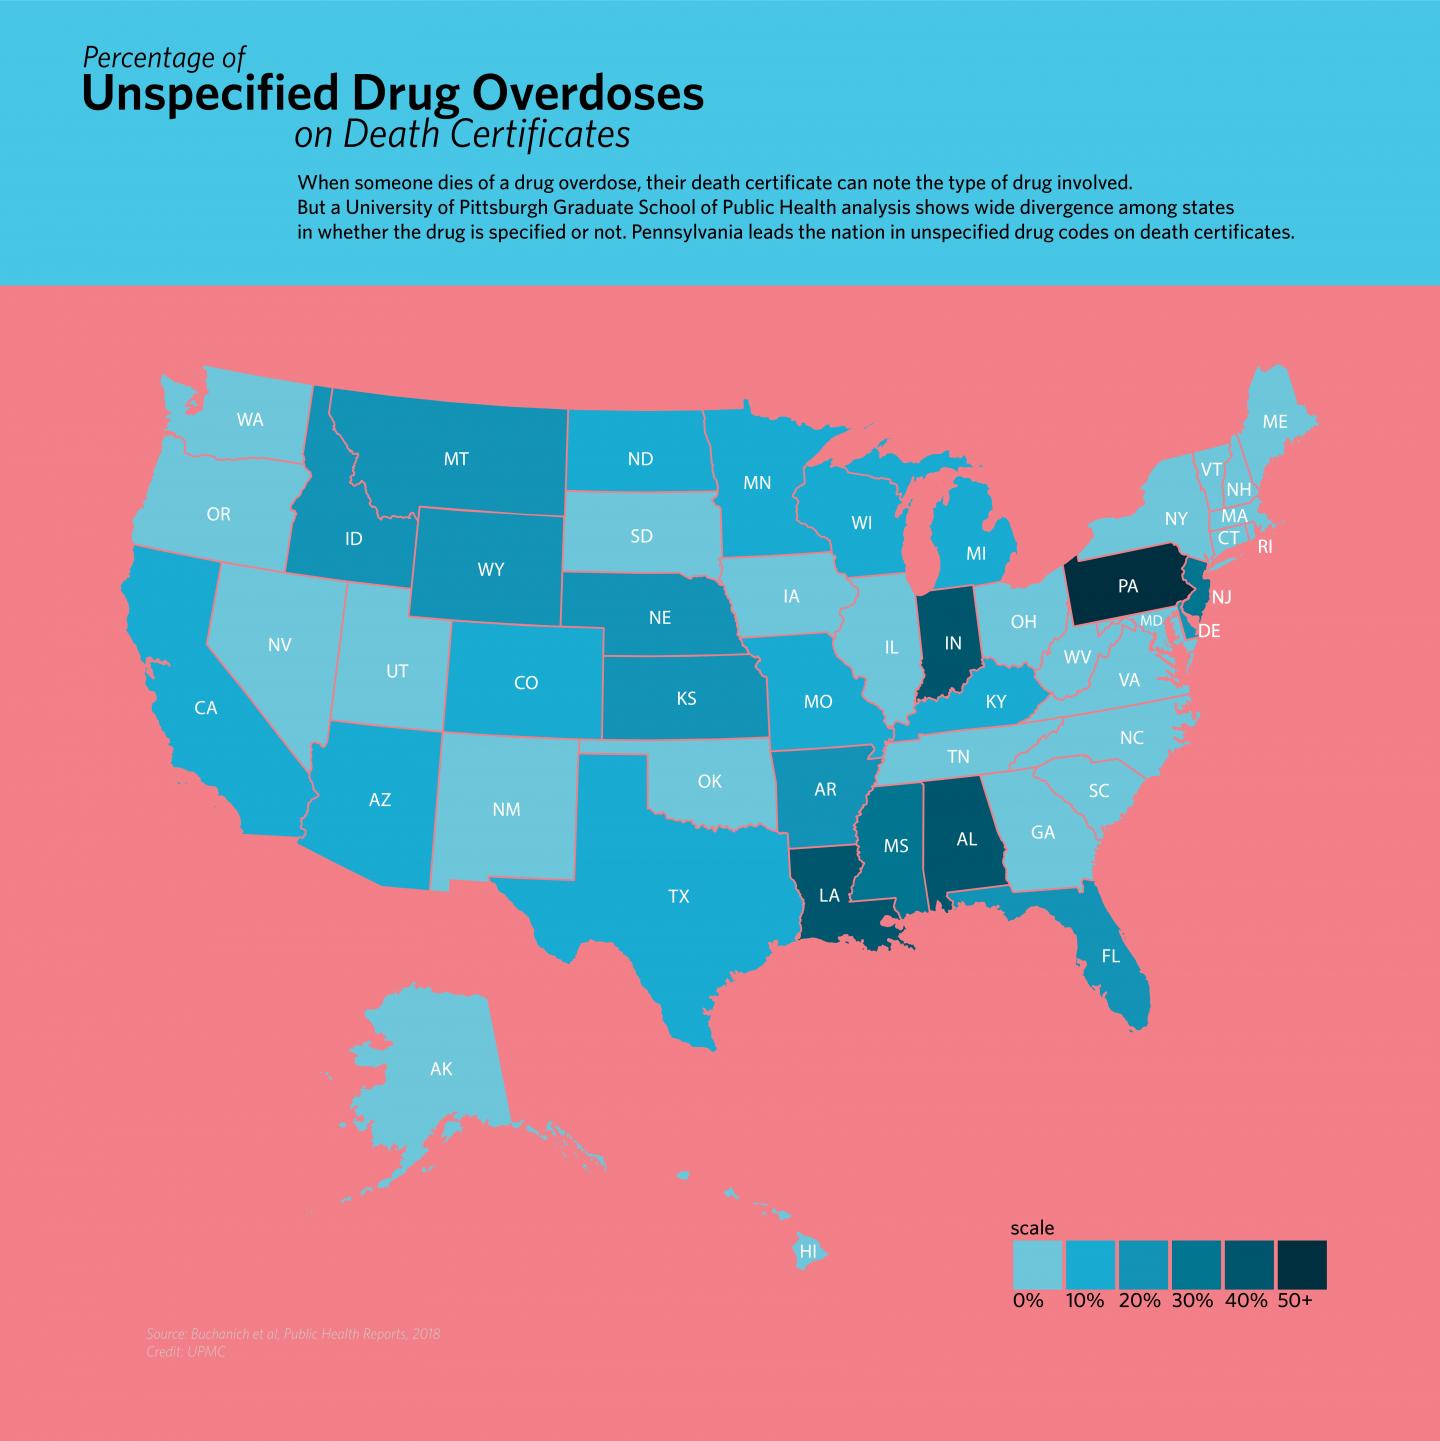 Percentage of Unspecified Drug Overdoses on Death Certificates